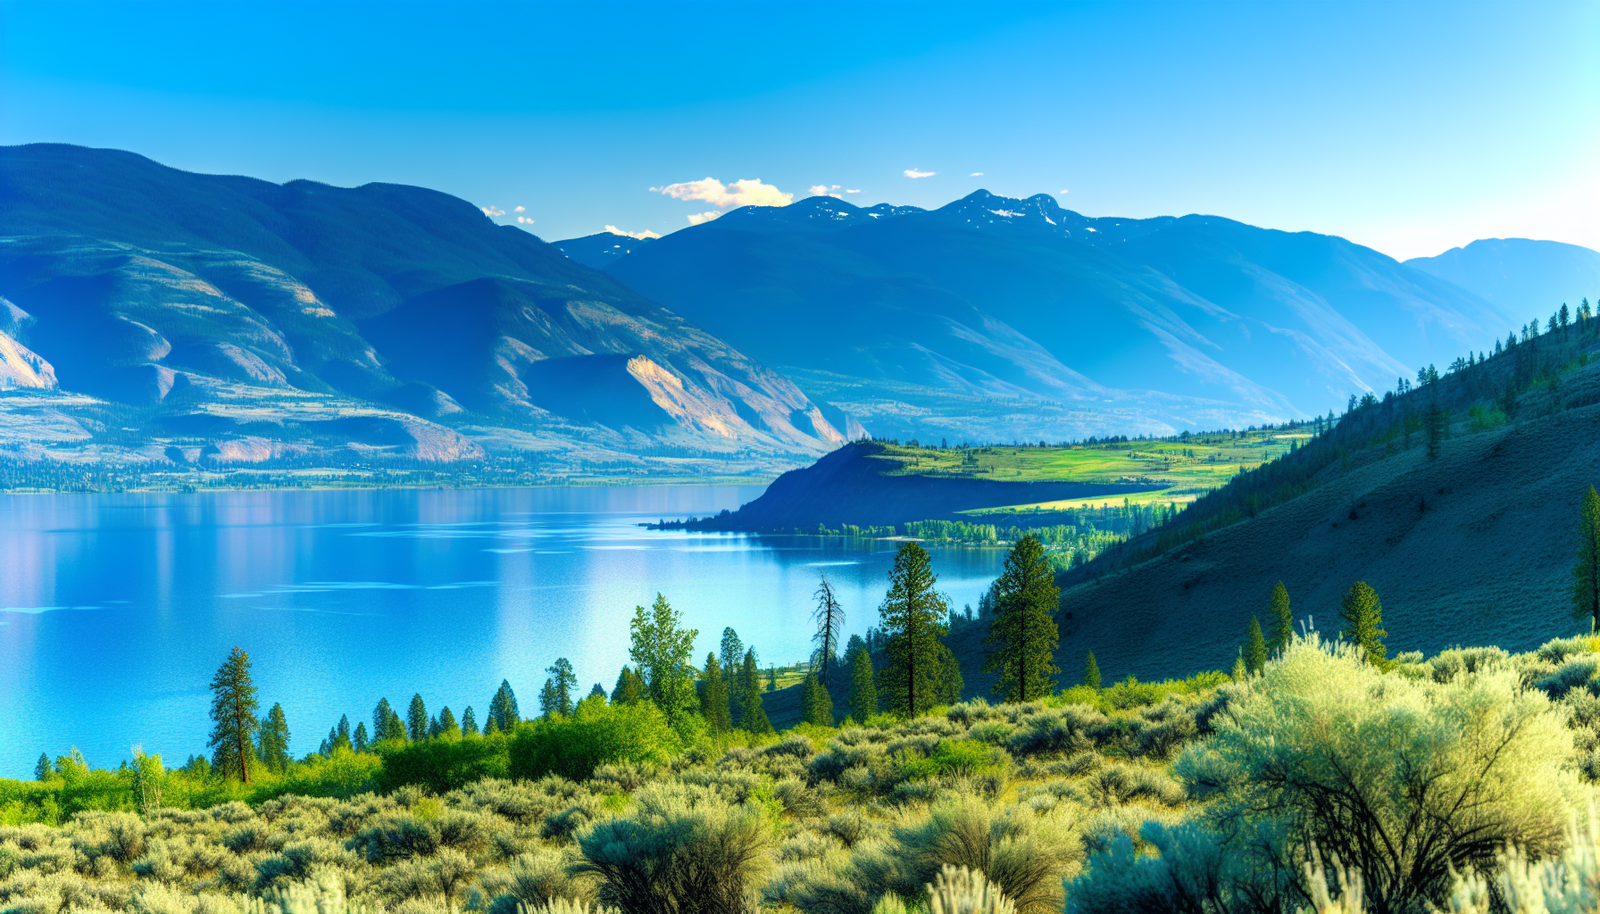 Scenic view of Osoyoos Lake with mountains in the background